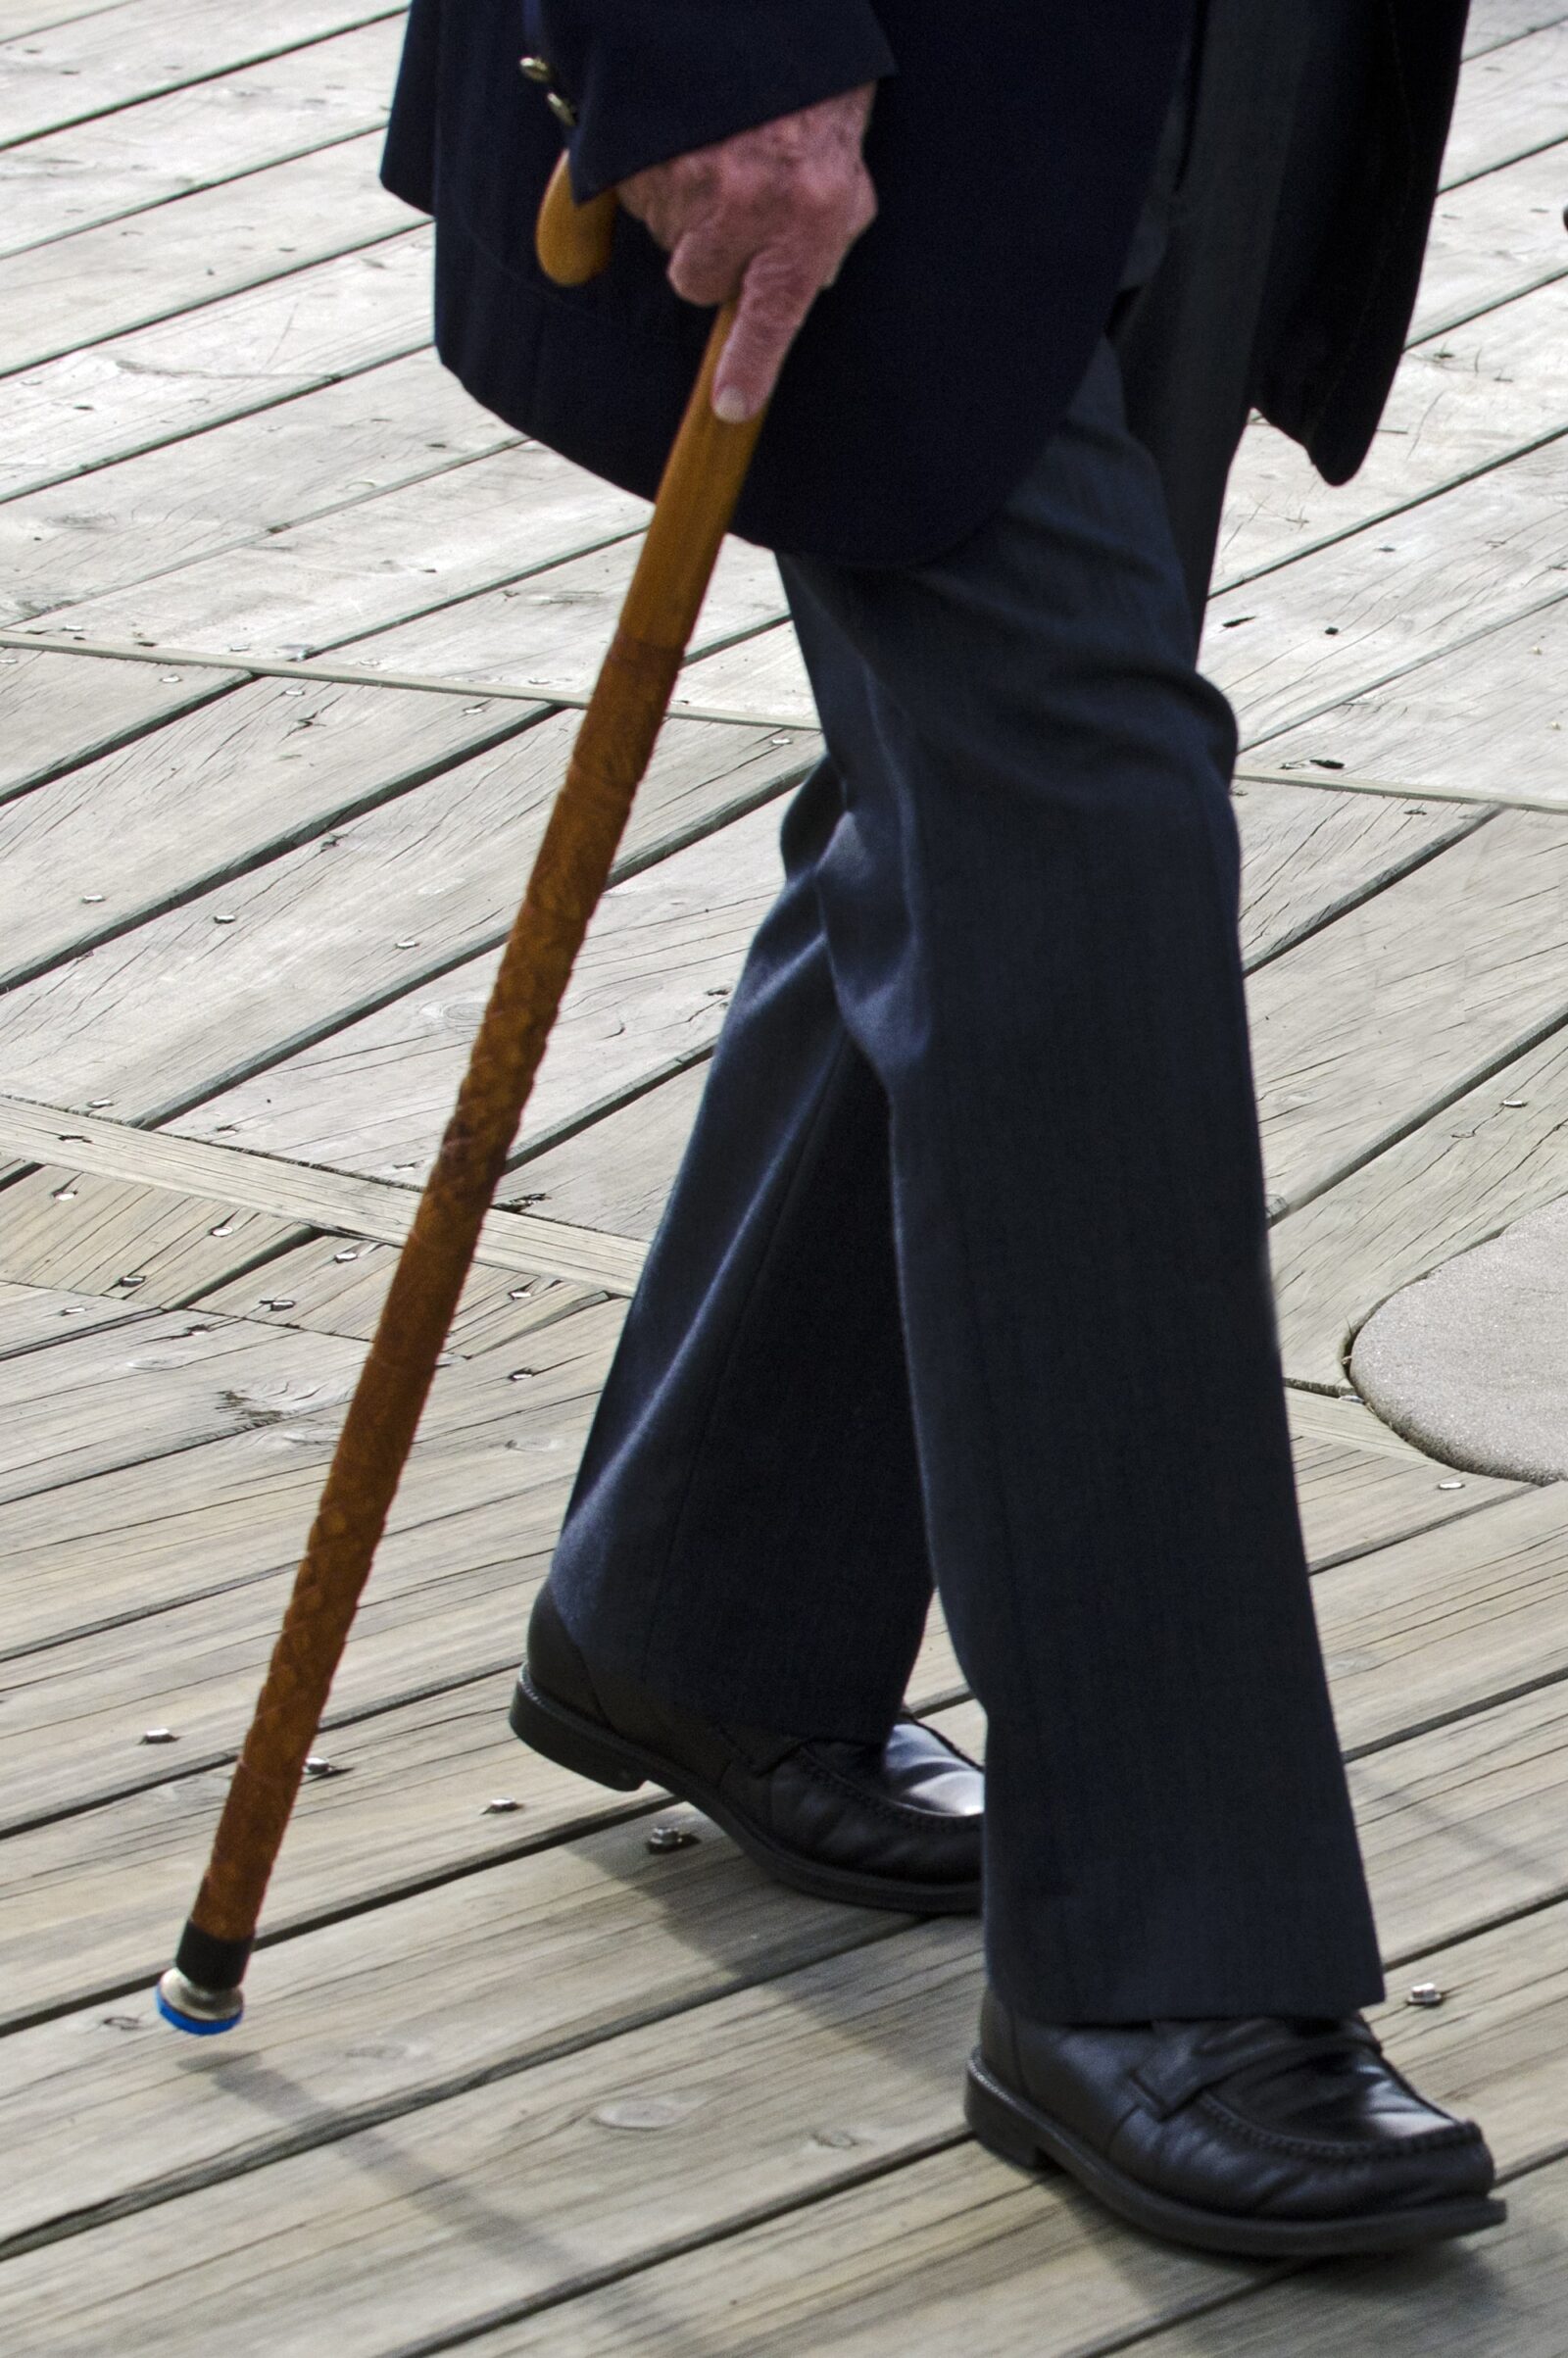 lower half of older man walking with cane